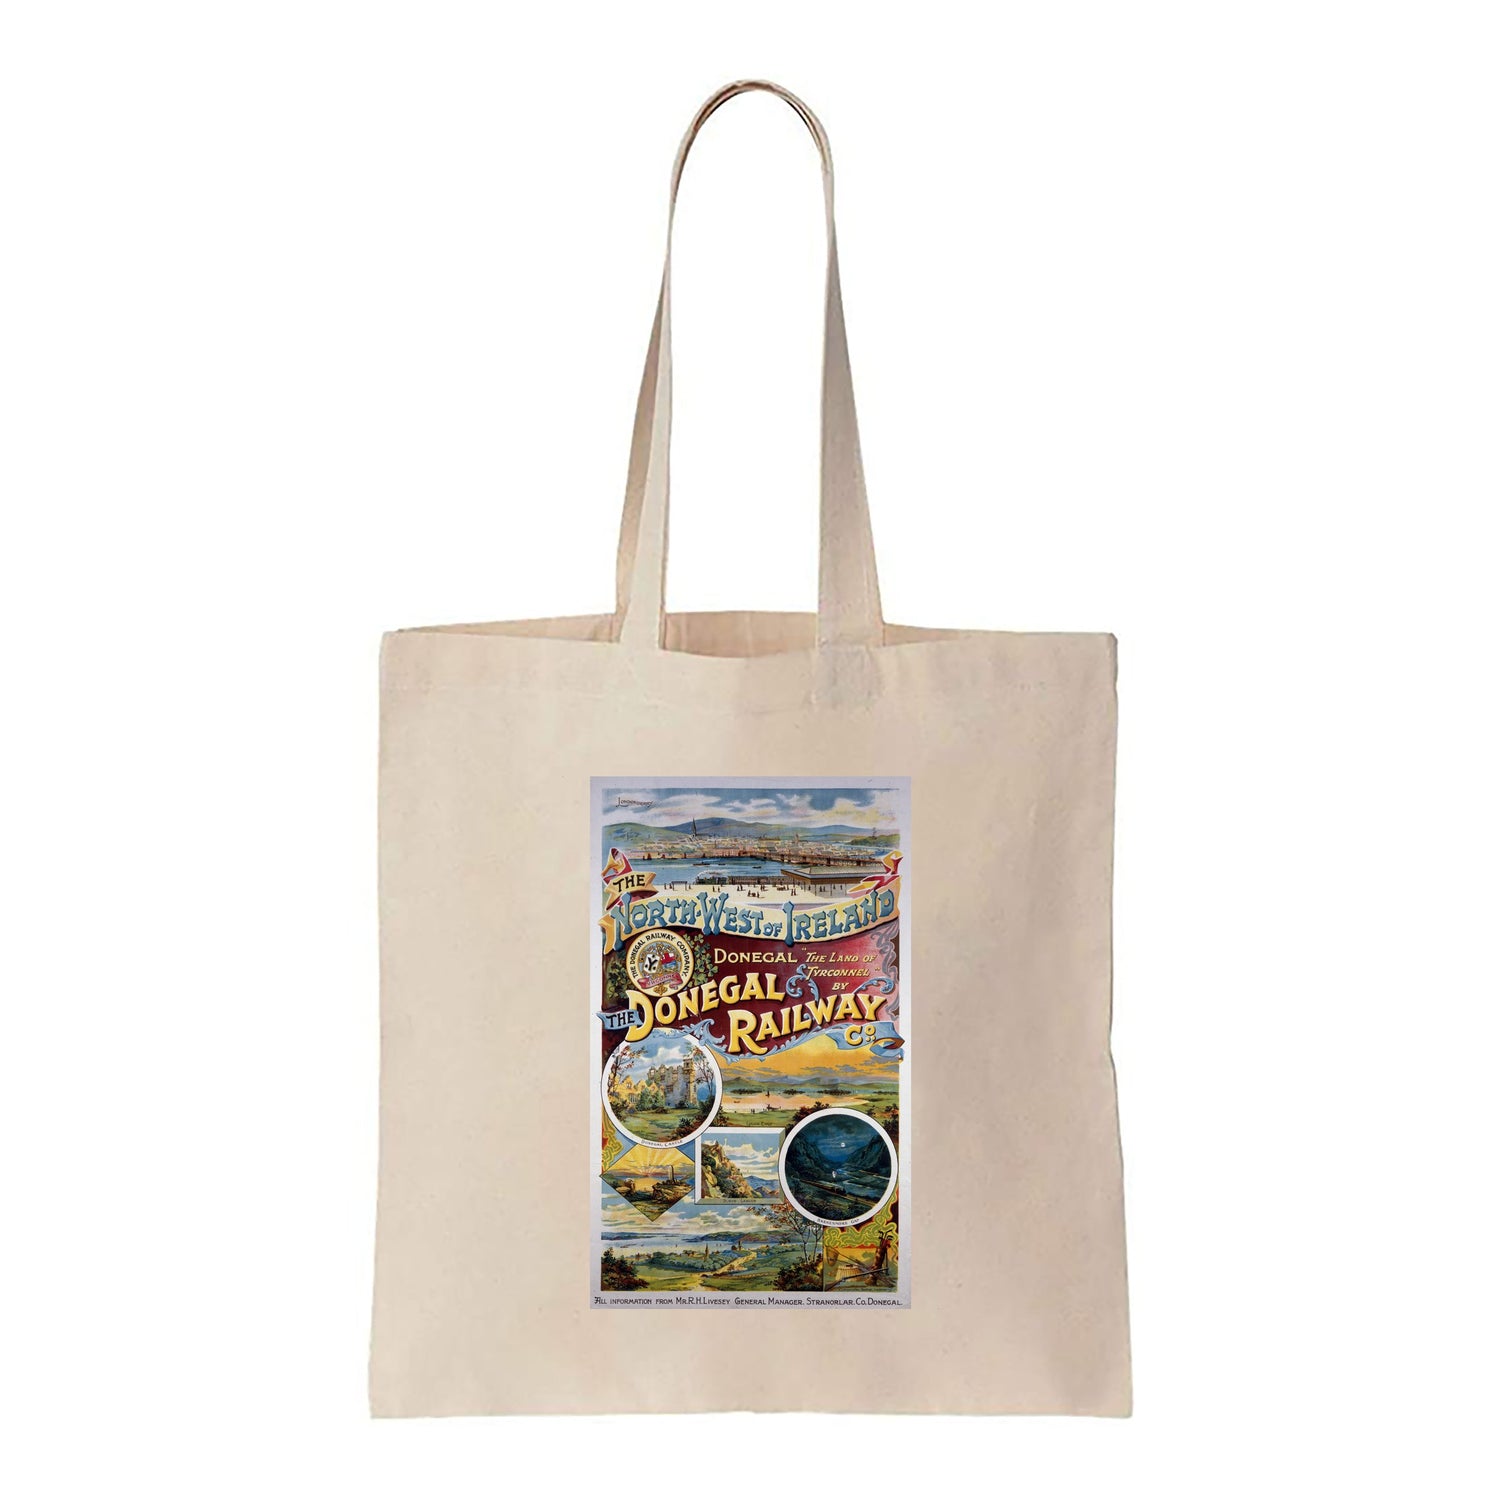 The North West of Ireland, The Donegal Railway - Canvas Tote Bag